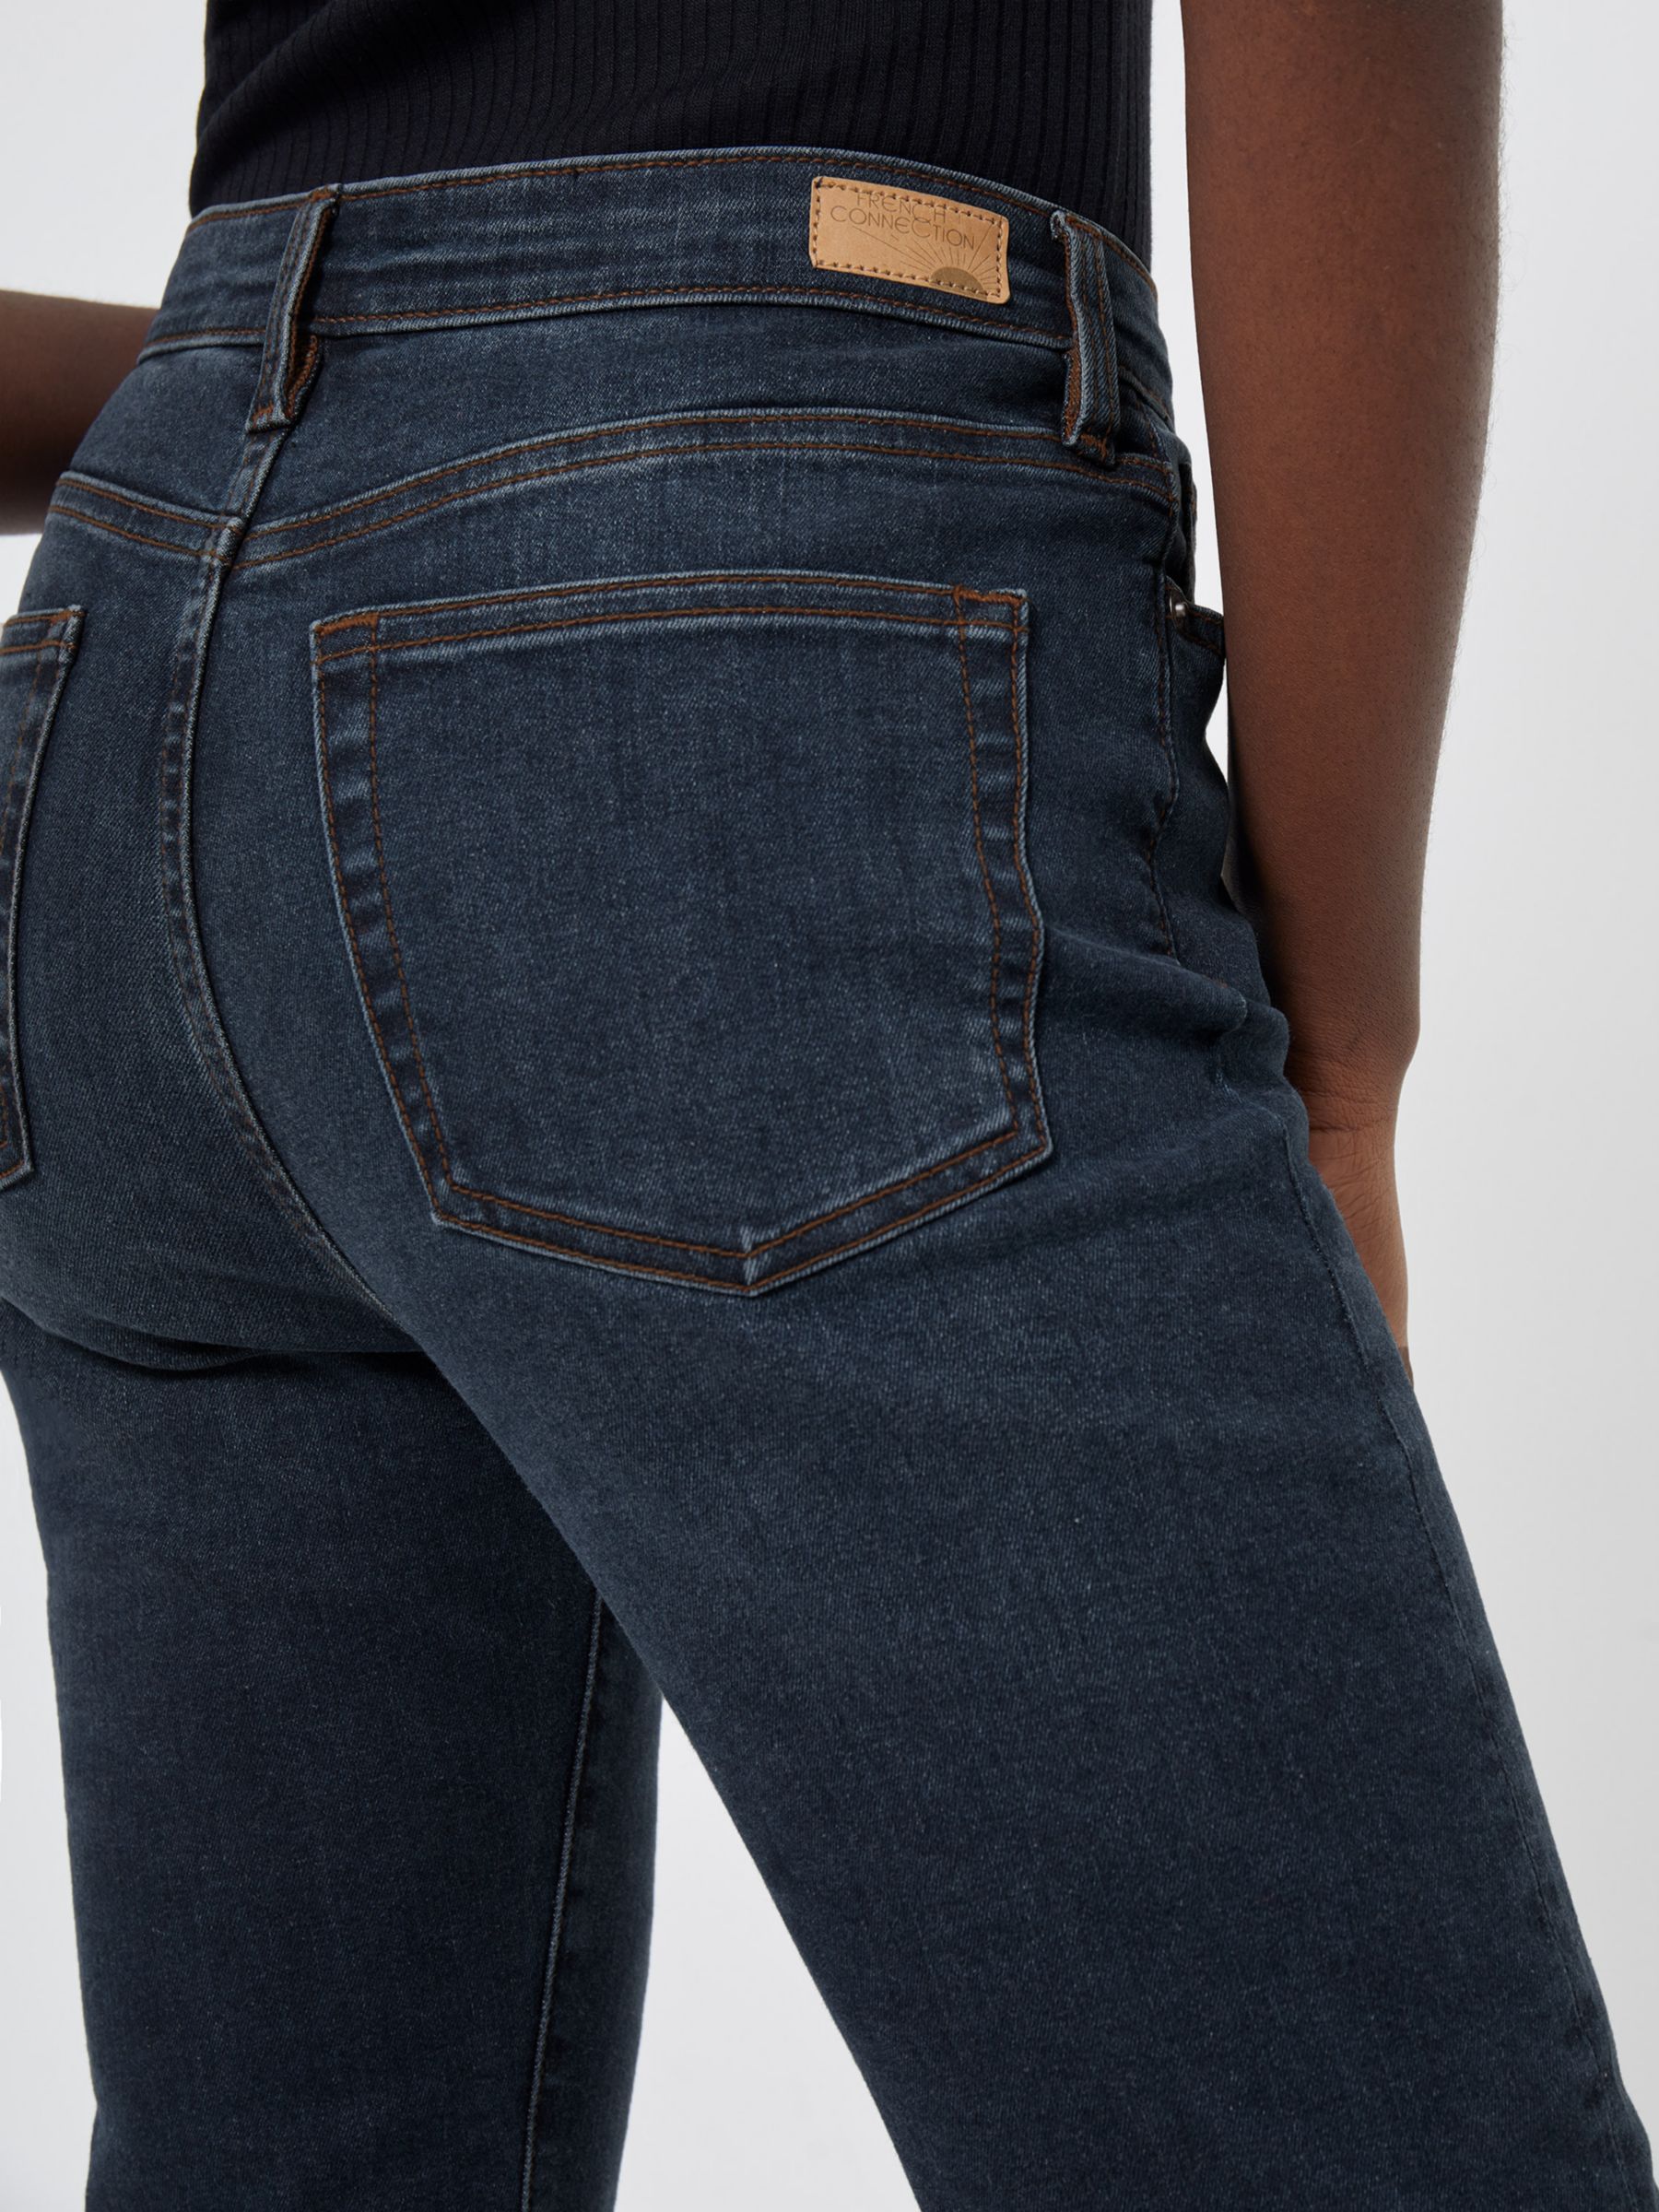 French Connection Stretch Slim Jeans, Washed Black at John Lewis & Partners